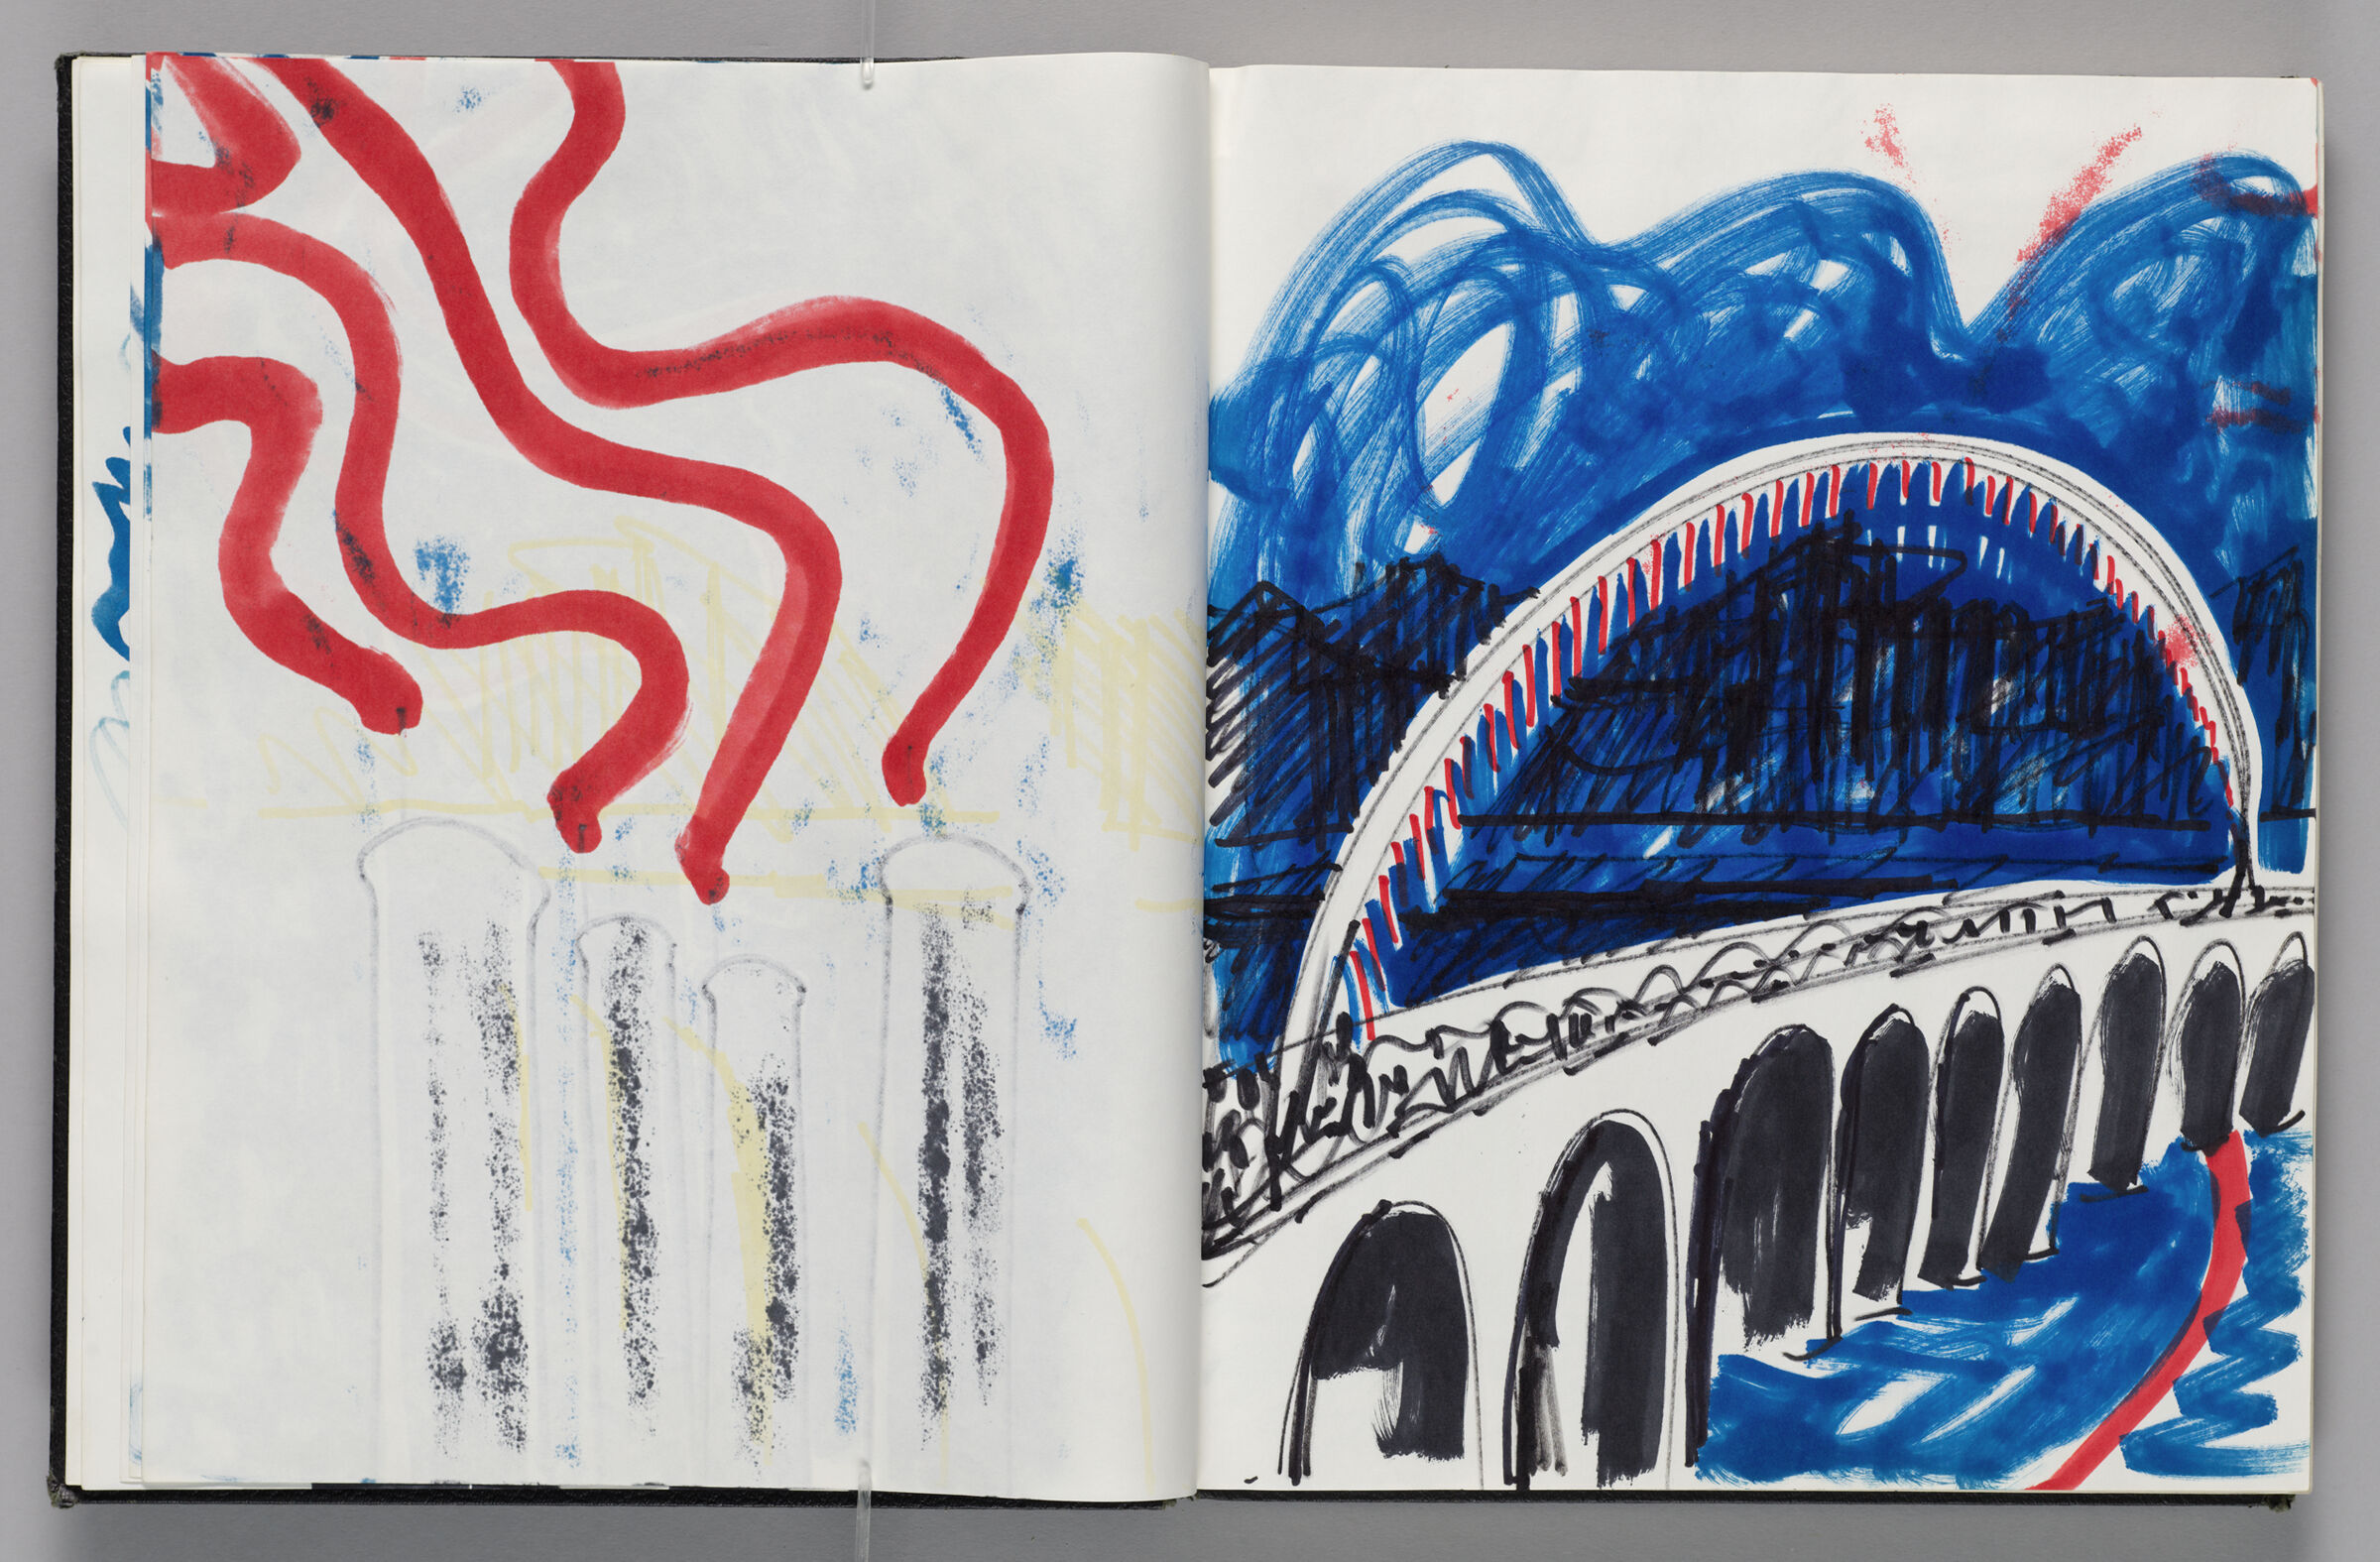 Untitled (Bleed-Through Of Previous Page, Left Page); Untitled (Design For Neon Rainbow Across Bridge, Right Page)